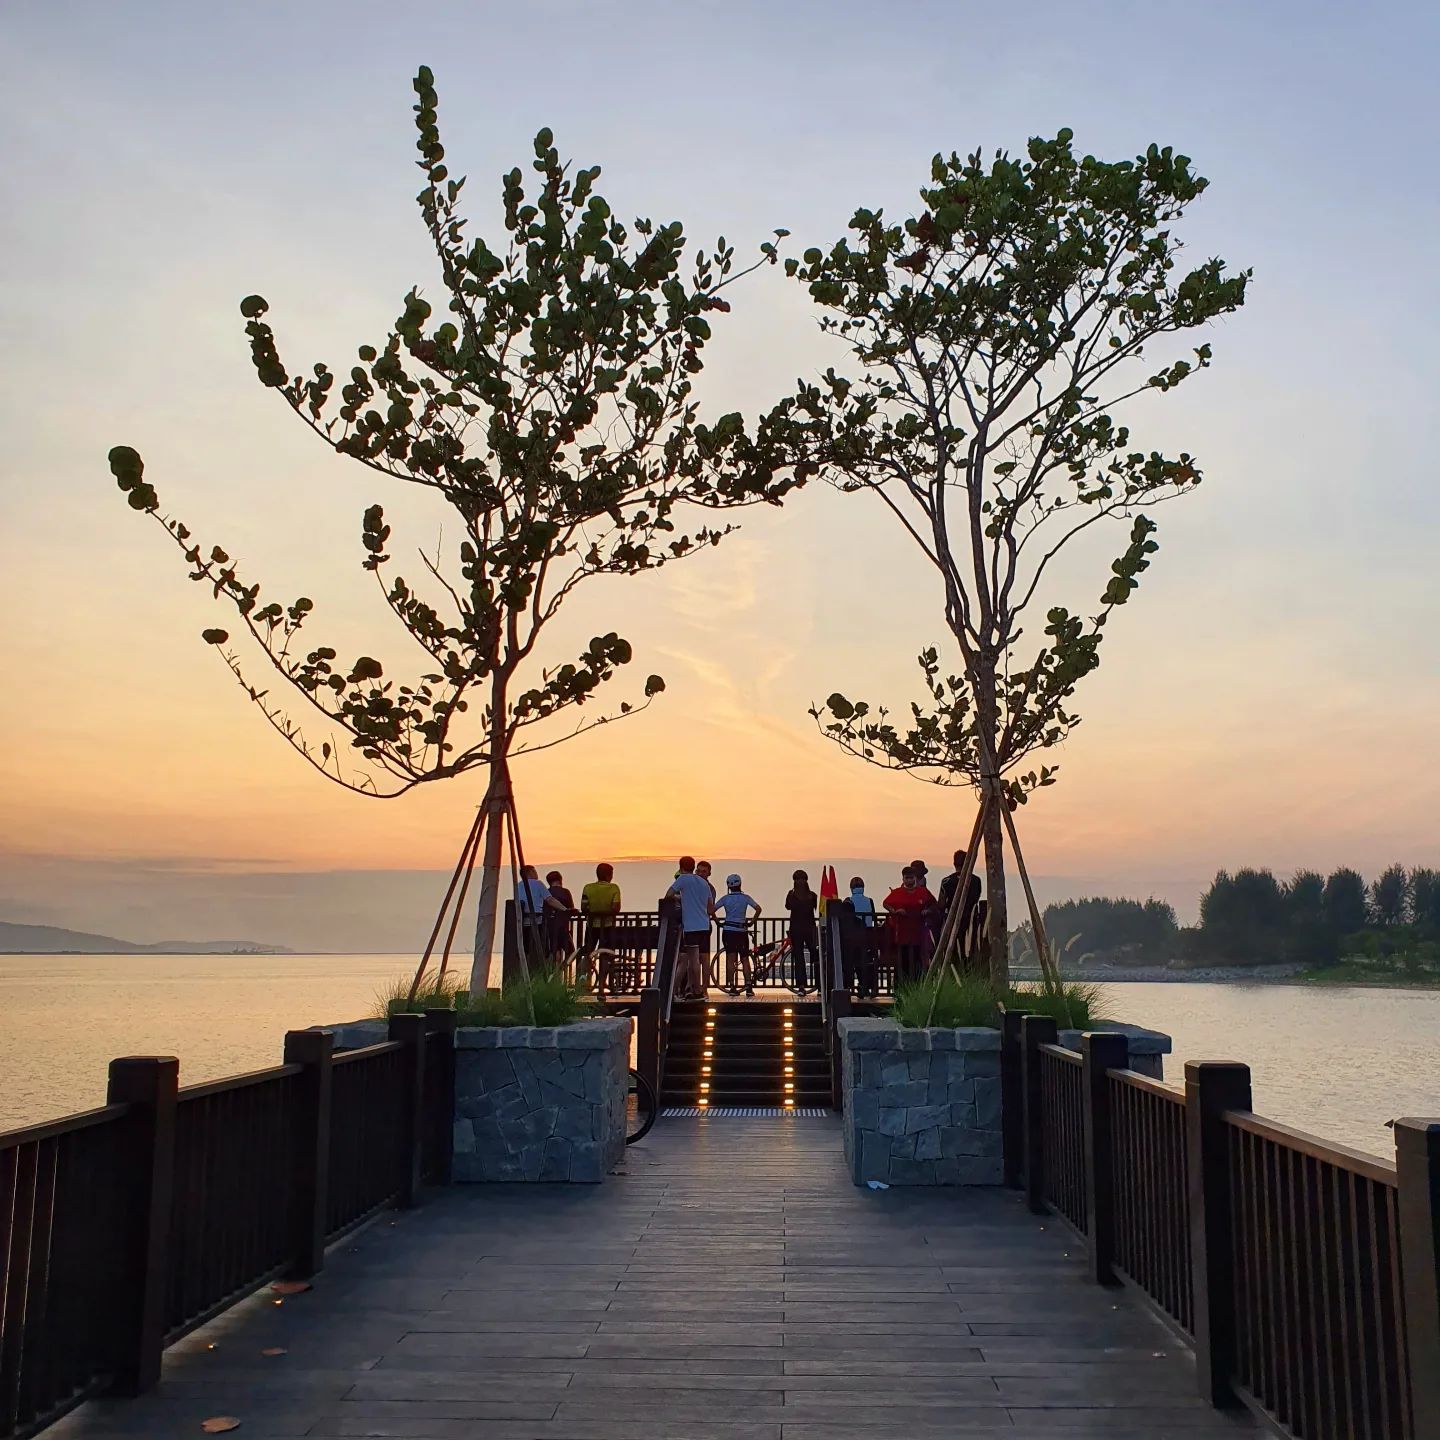 Sunrise & sunset spots in Singapore - Changi Bay Point lookout point